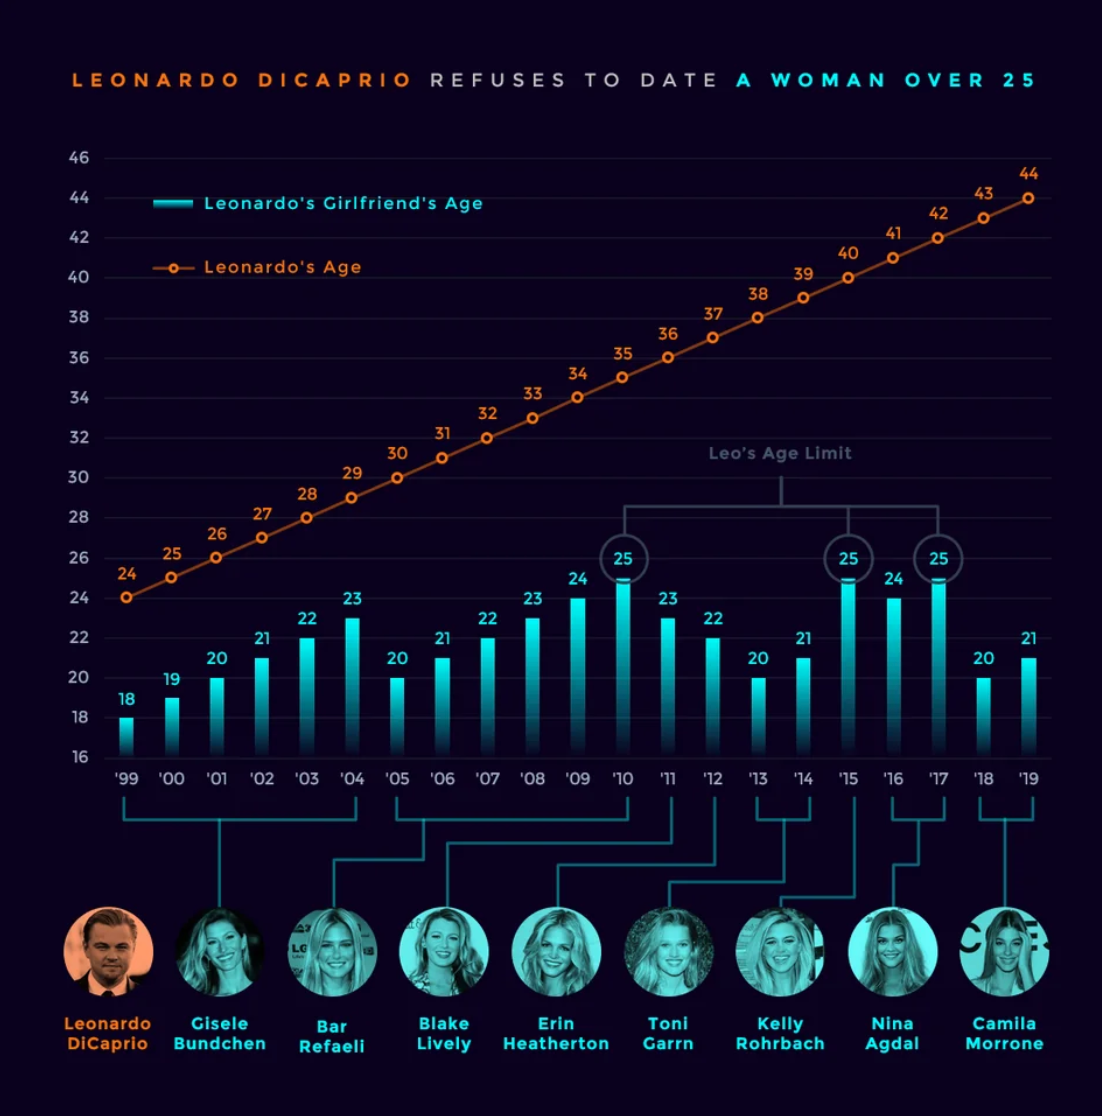 A fan-made chart detailing Leonardo DiCaprio's dating history reveals that 25 seems to be his cut-off age.